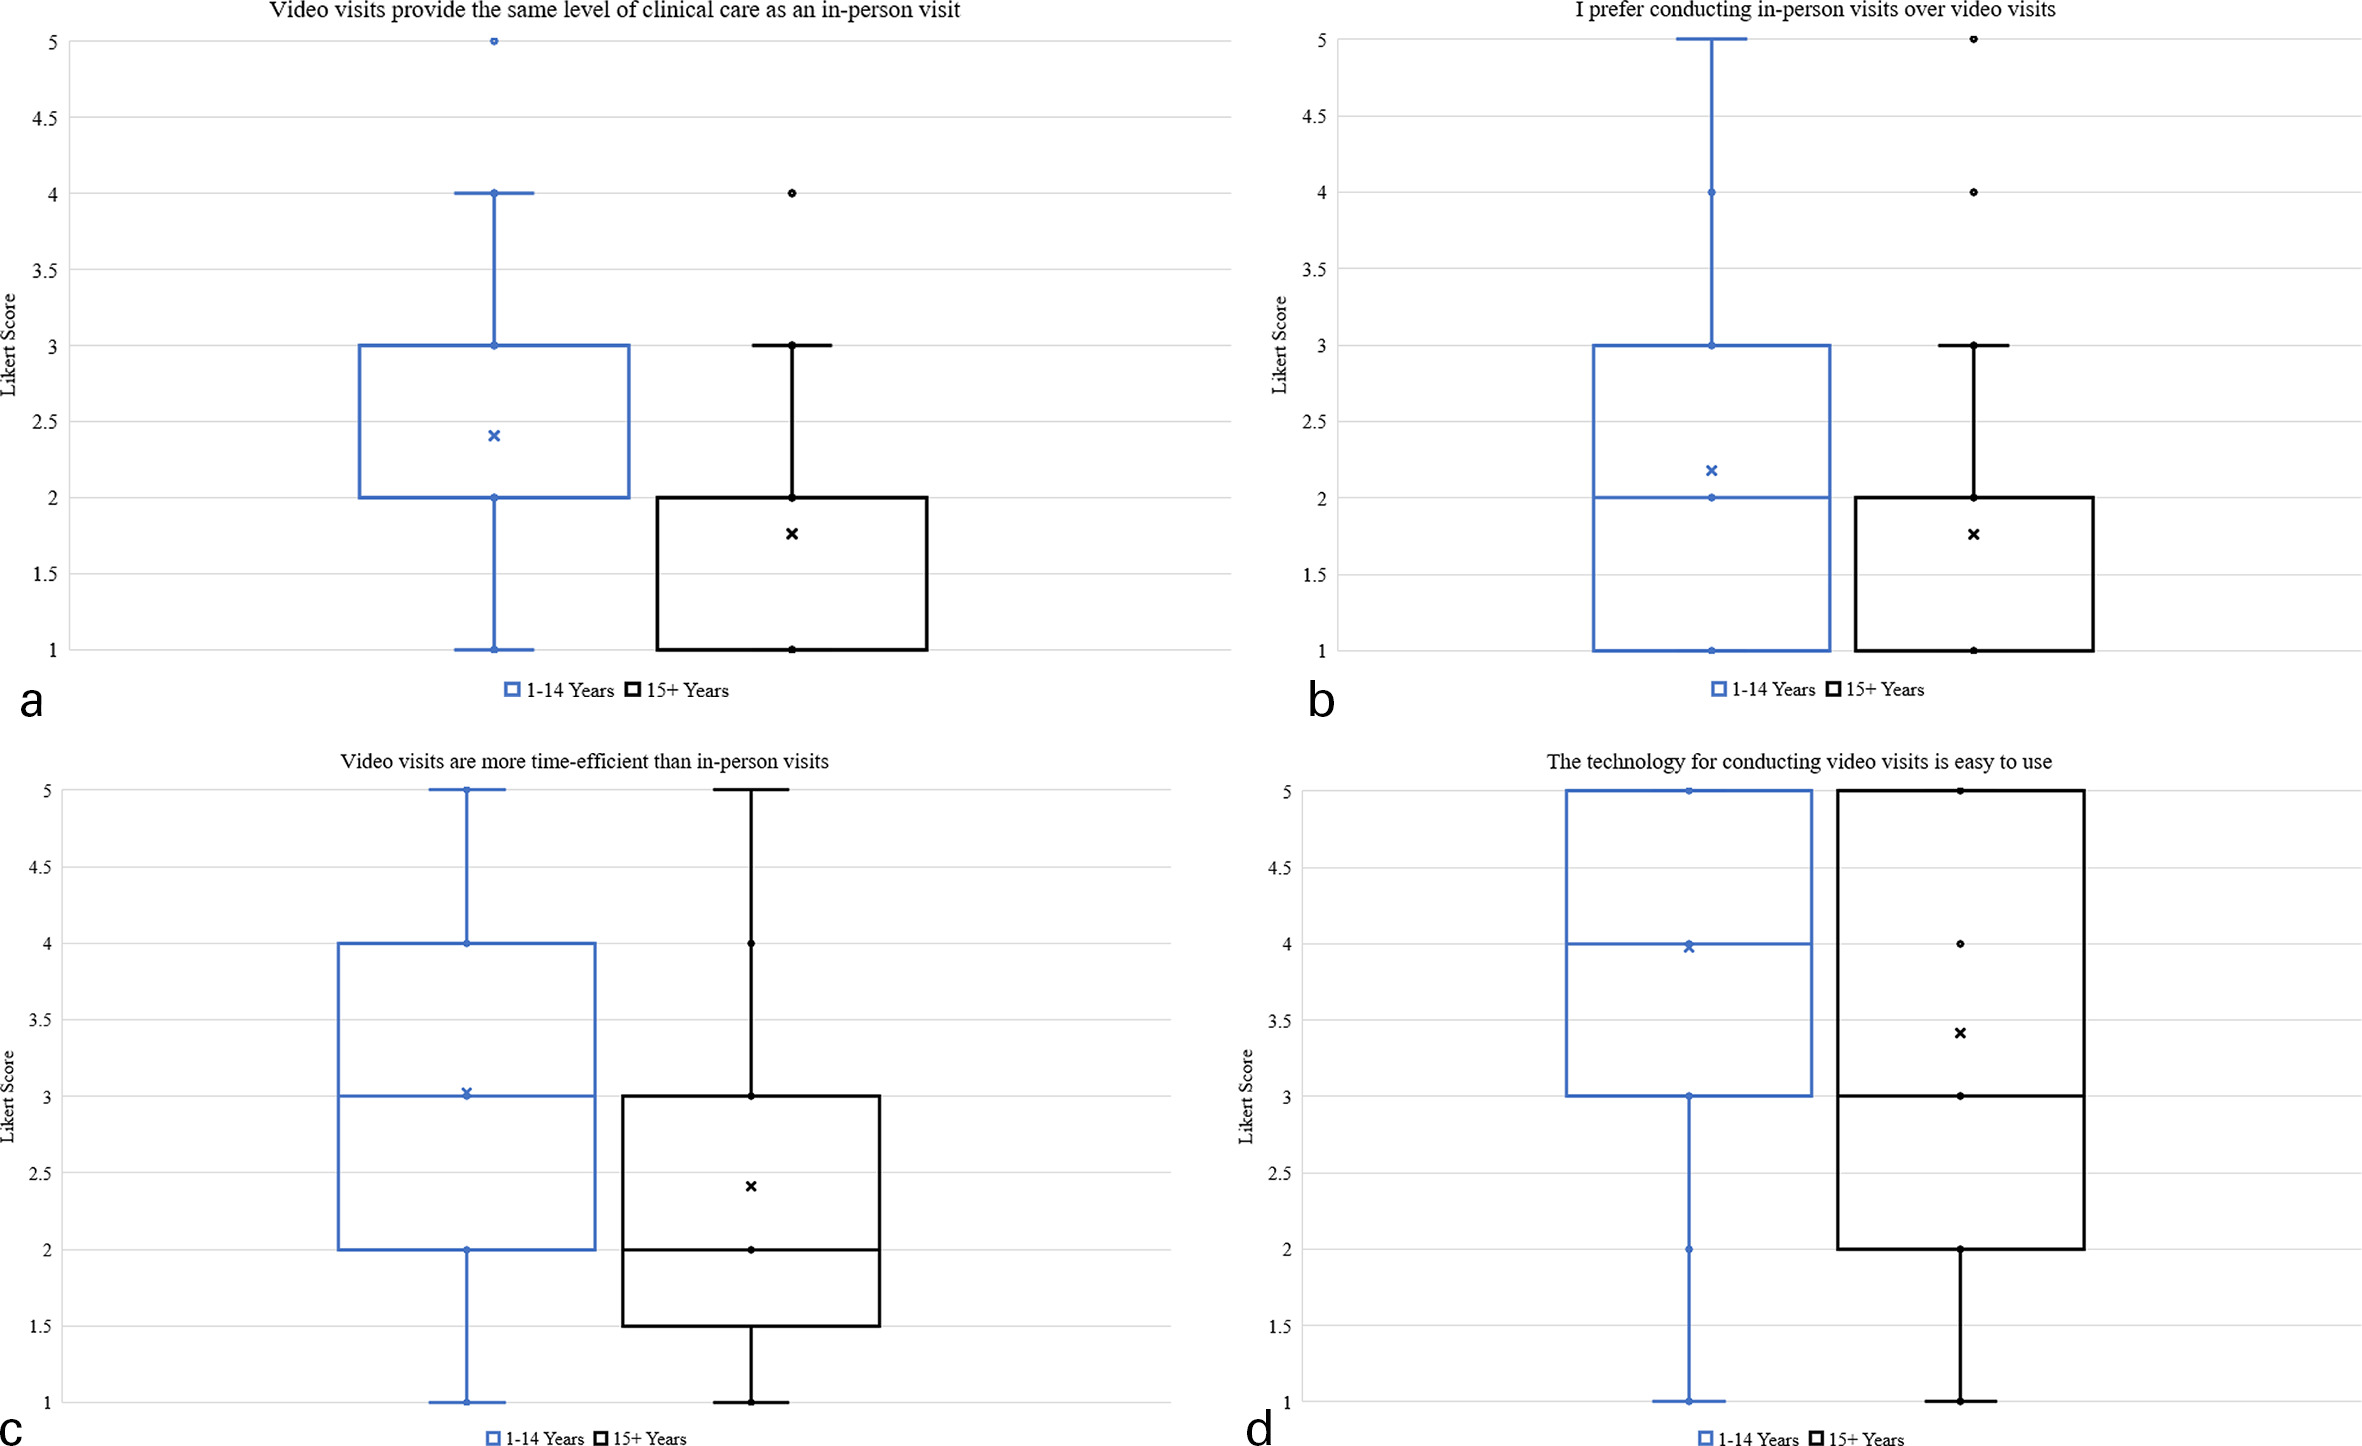 Fig. 2 
          Orthopaedic provider perceptions of virtual care during non-pandemic circumstances based on years of experience: Likert scores are scaled from 1 to 5, with 1 representing “Strongly Disagree” and 5 representing “Strongly Agree”. Survey responses are represented using box plots, with means being represented by circle and plus-sign characters. Statistical significance (p < 0.05) is indicated by asterisks.
        